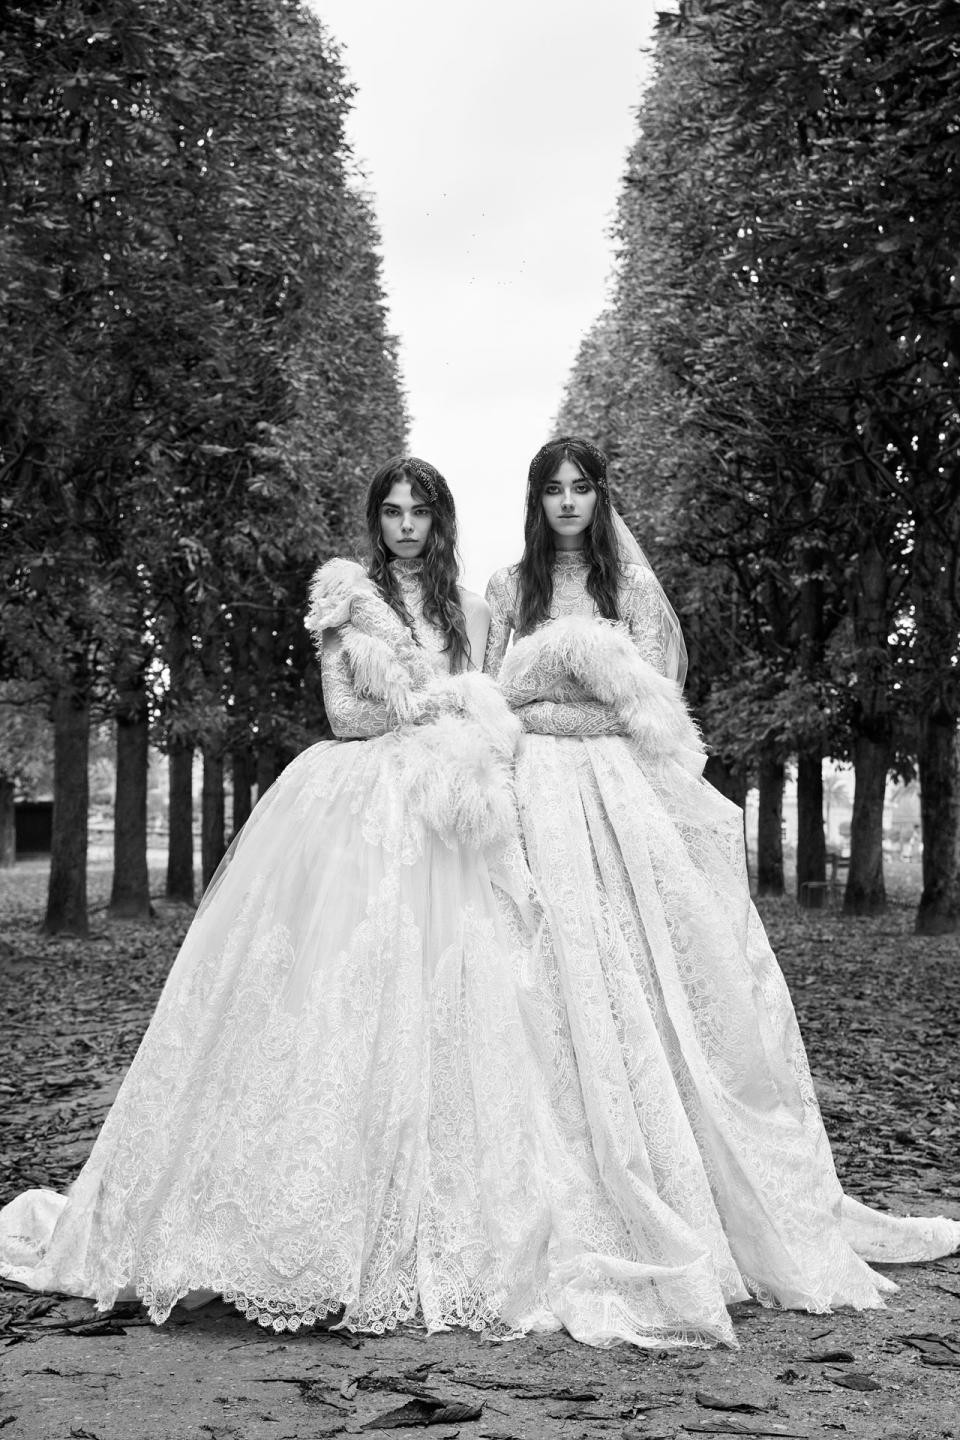 <p><i>From left, long-sleeve macramé lace ball gown with high-neck accent and couture hand-draped skirt; long-sleeve ball gown with macramé lace panels. (Photo: Courtesy of Vera Wang/Patrick Demarchelier) </i></p>